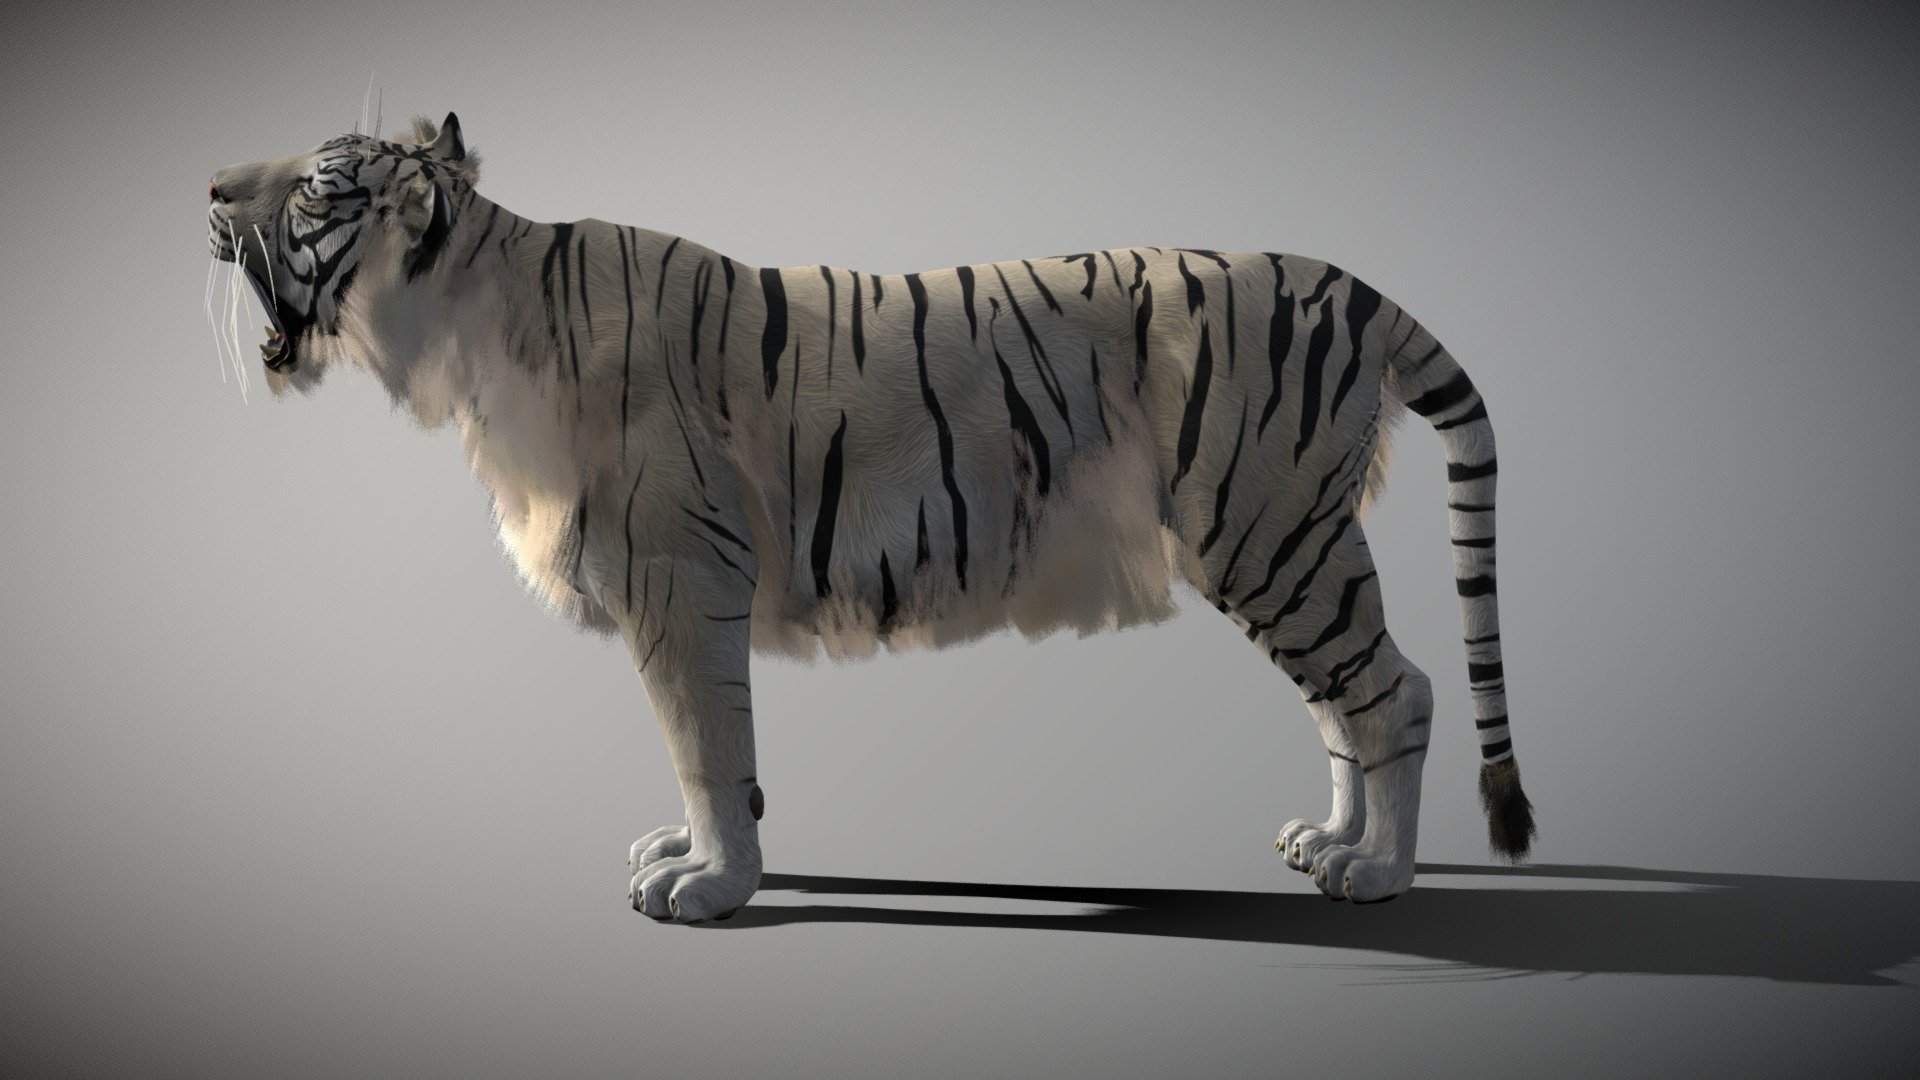 Tiger created in blender, zbrush and substance painter Textures 4096 * 4096 5 animations: walk cycle, run cycle, roar, leftattack and right attack original blender file linked

Wiki: The tiger (Panthera tigris) is the largest living cat species and a member of the genus Panthera. It is most recognisable for its dark vertical stripes on orange fur with a white underside. An apex predator, it primarily preys on ungulates such as deer and wild boar. It is territorial and generally a solitary but social predator, requiring large contiguous areas of habitat, which support its requirements for prey and rearing of its offspring. Tiger cubs stay with their mother for about two years, then become independent and leave their mother’s home range to establish their own - White Tiger - Buy Royalty Free 3D model by creatureFab (@3dCoast) 3d model